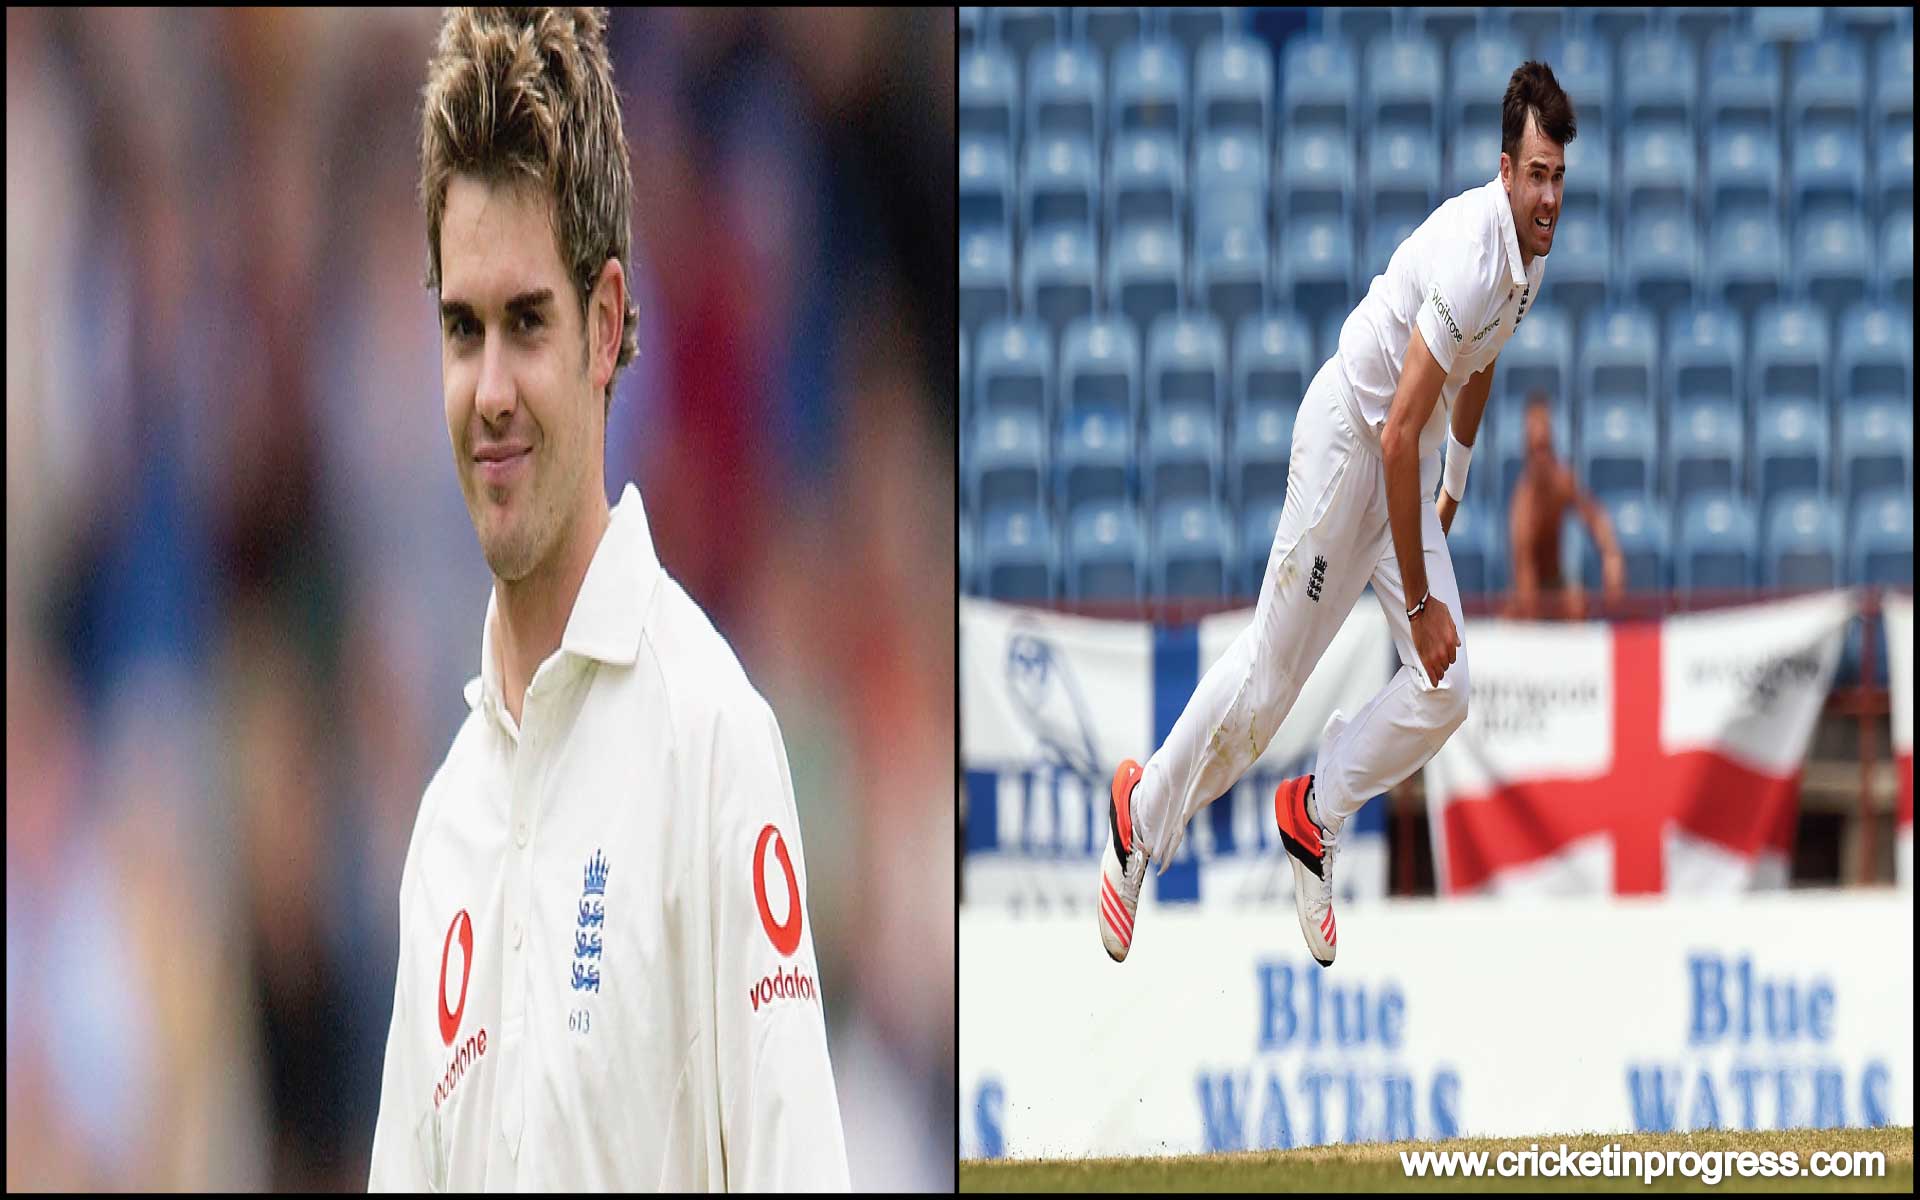 James Anderson The unsung fast bowling hero from England